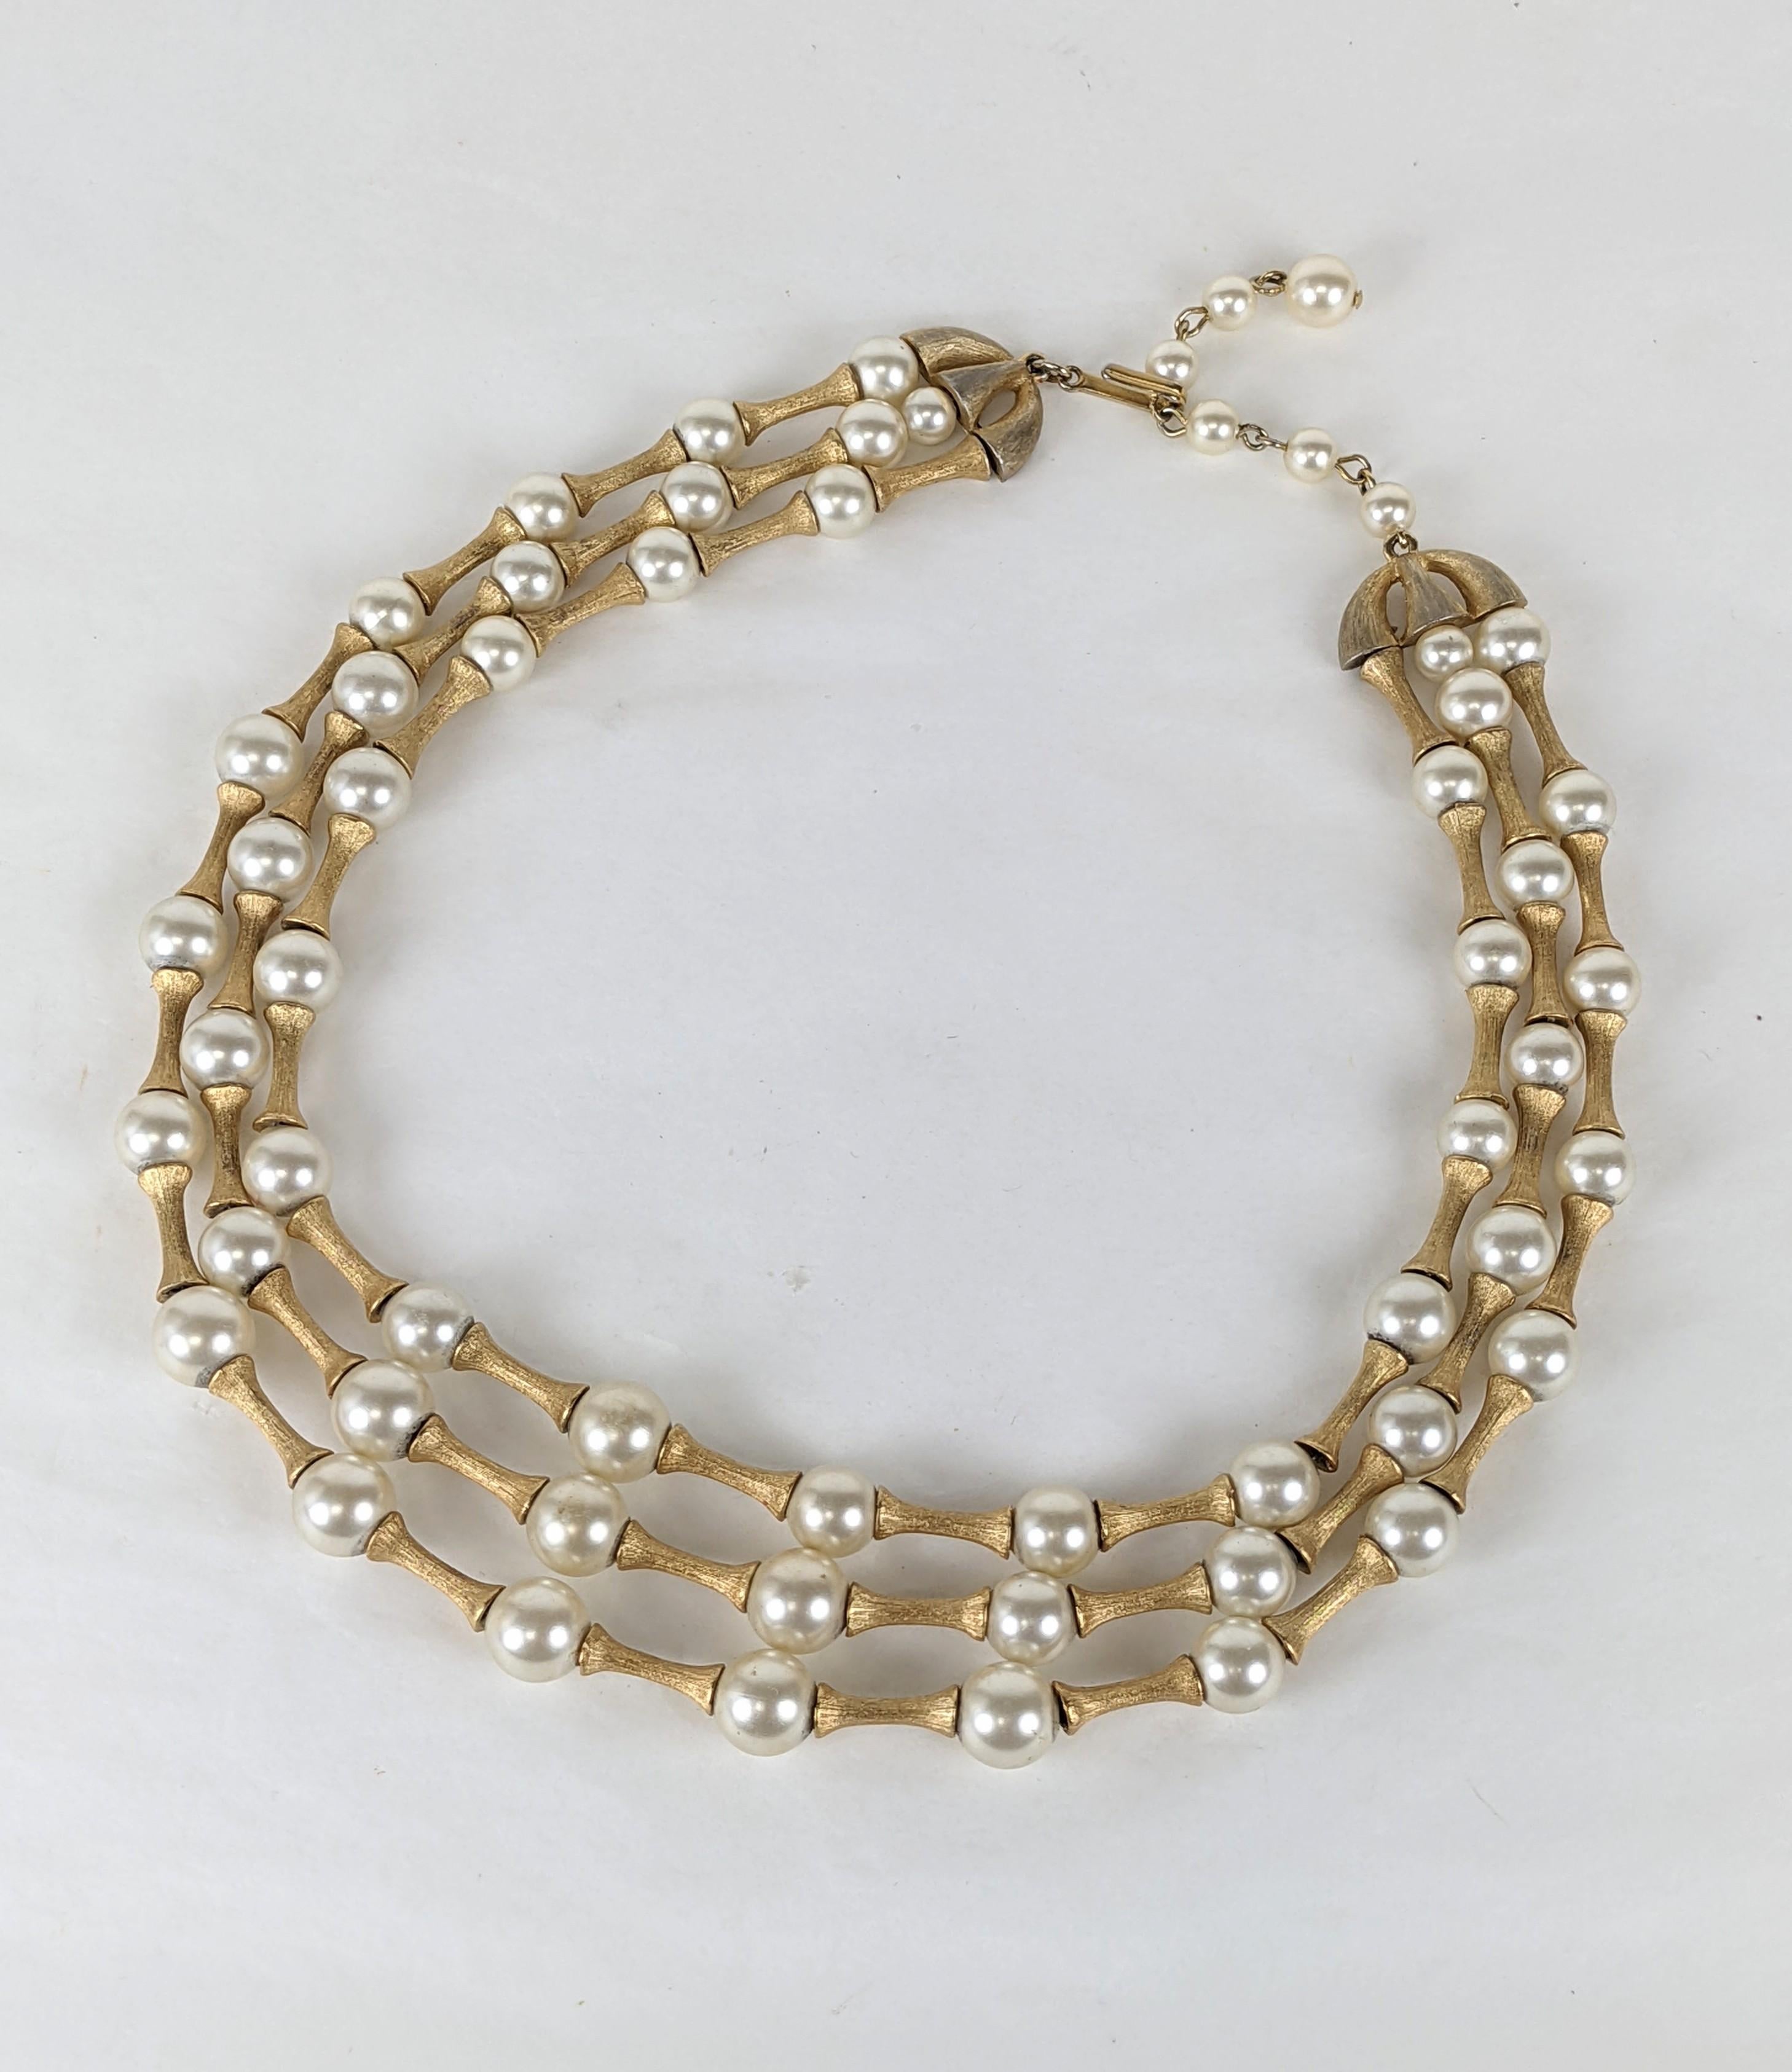 Attractive Trifari Modernist Pearl and Toggle Necklace from the 1960's. 3 graduated strands of faux pearls with florentine spacers in between.  1960's USA. 
Adjustable 14.5